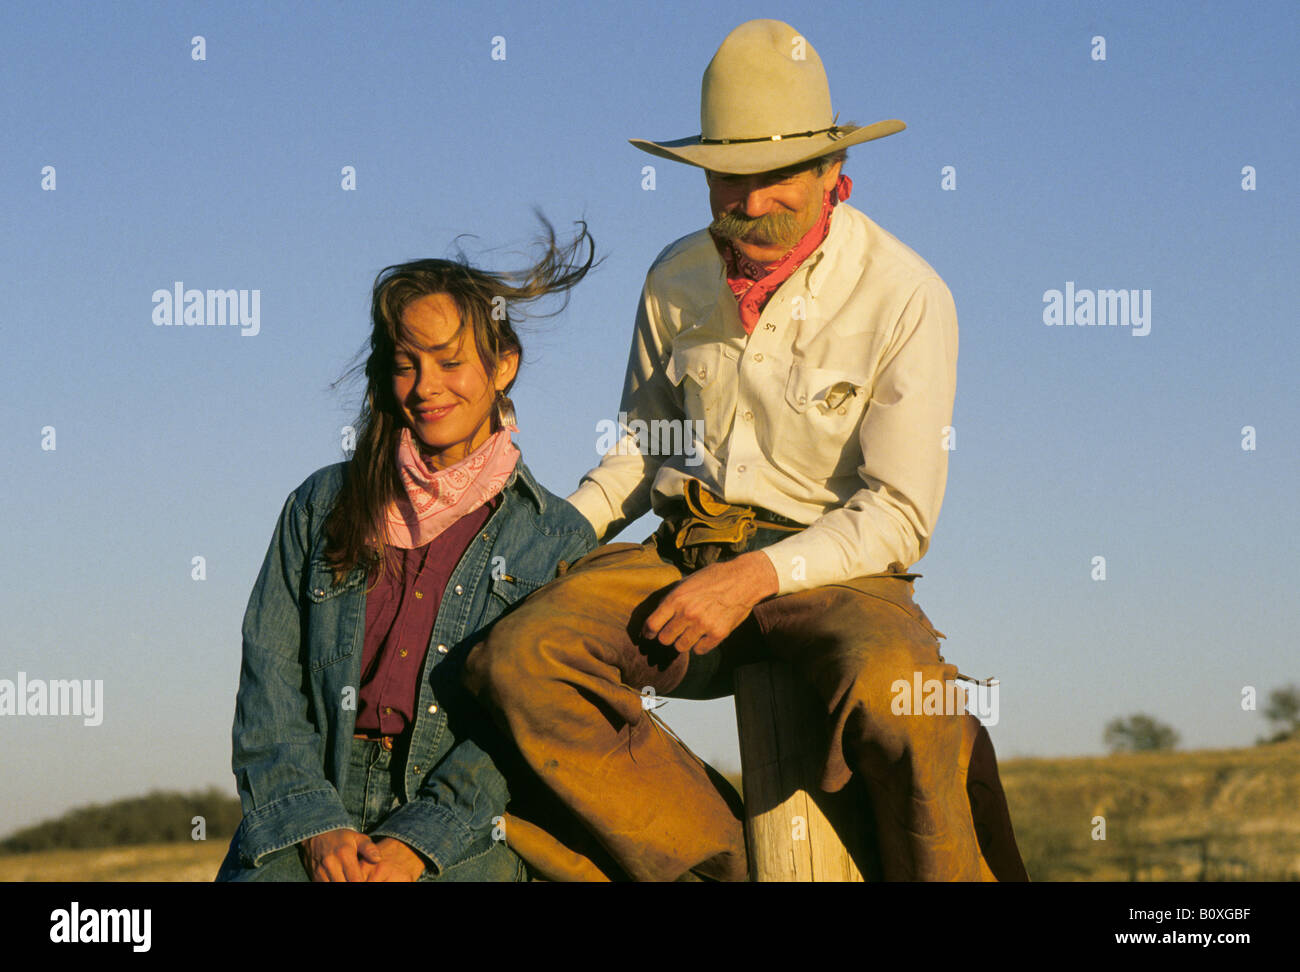 A cowgirl guest at a dude ranch near San Antonio Texas sits on a fence with a cowboy wranger in chaps and a big hat at sunset Stock Photo